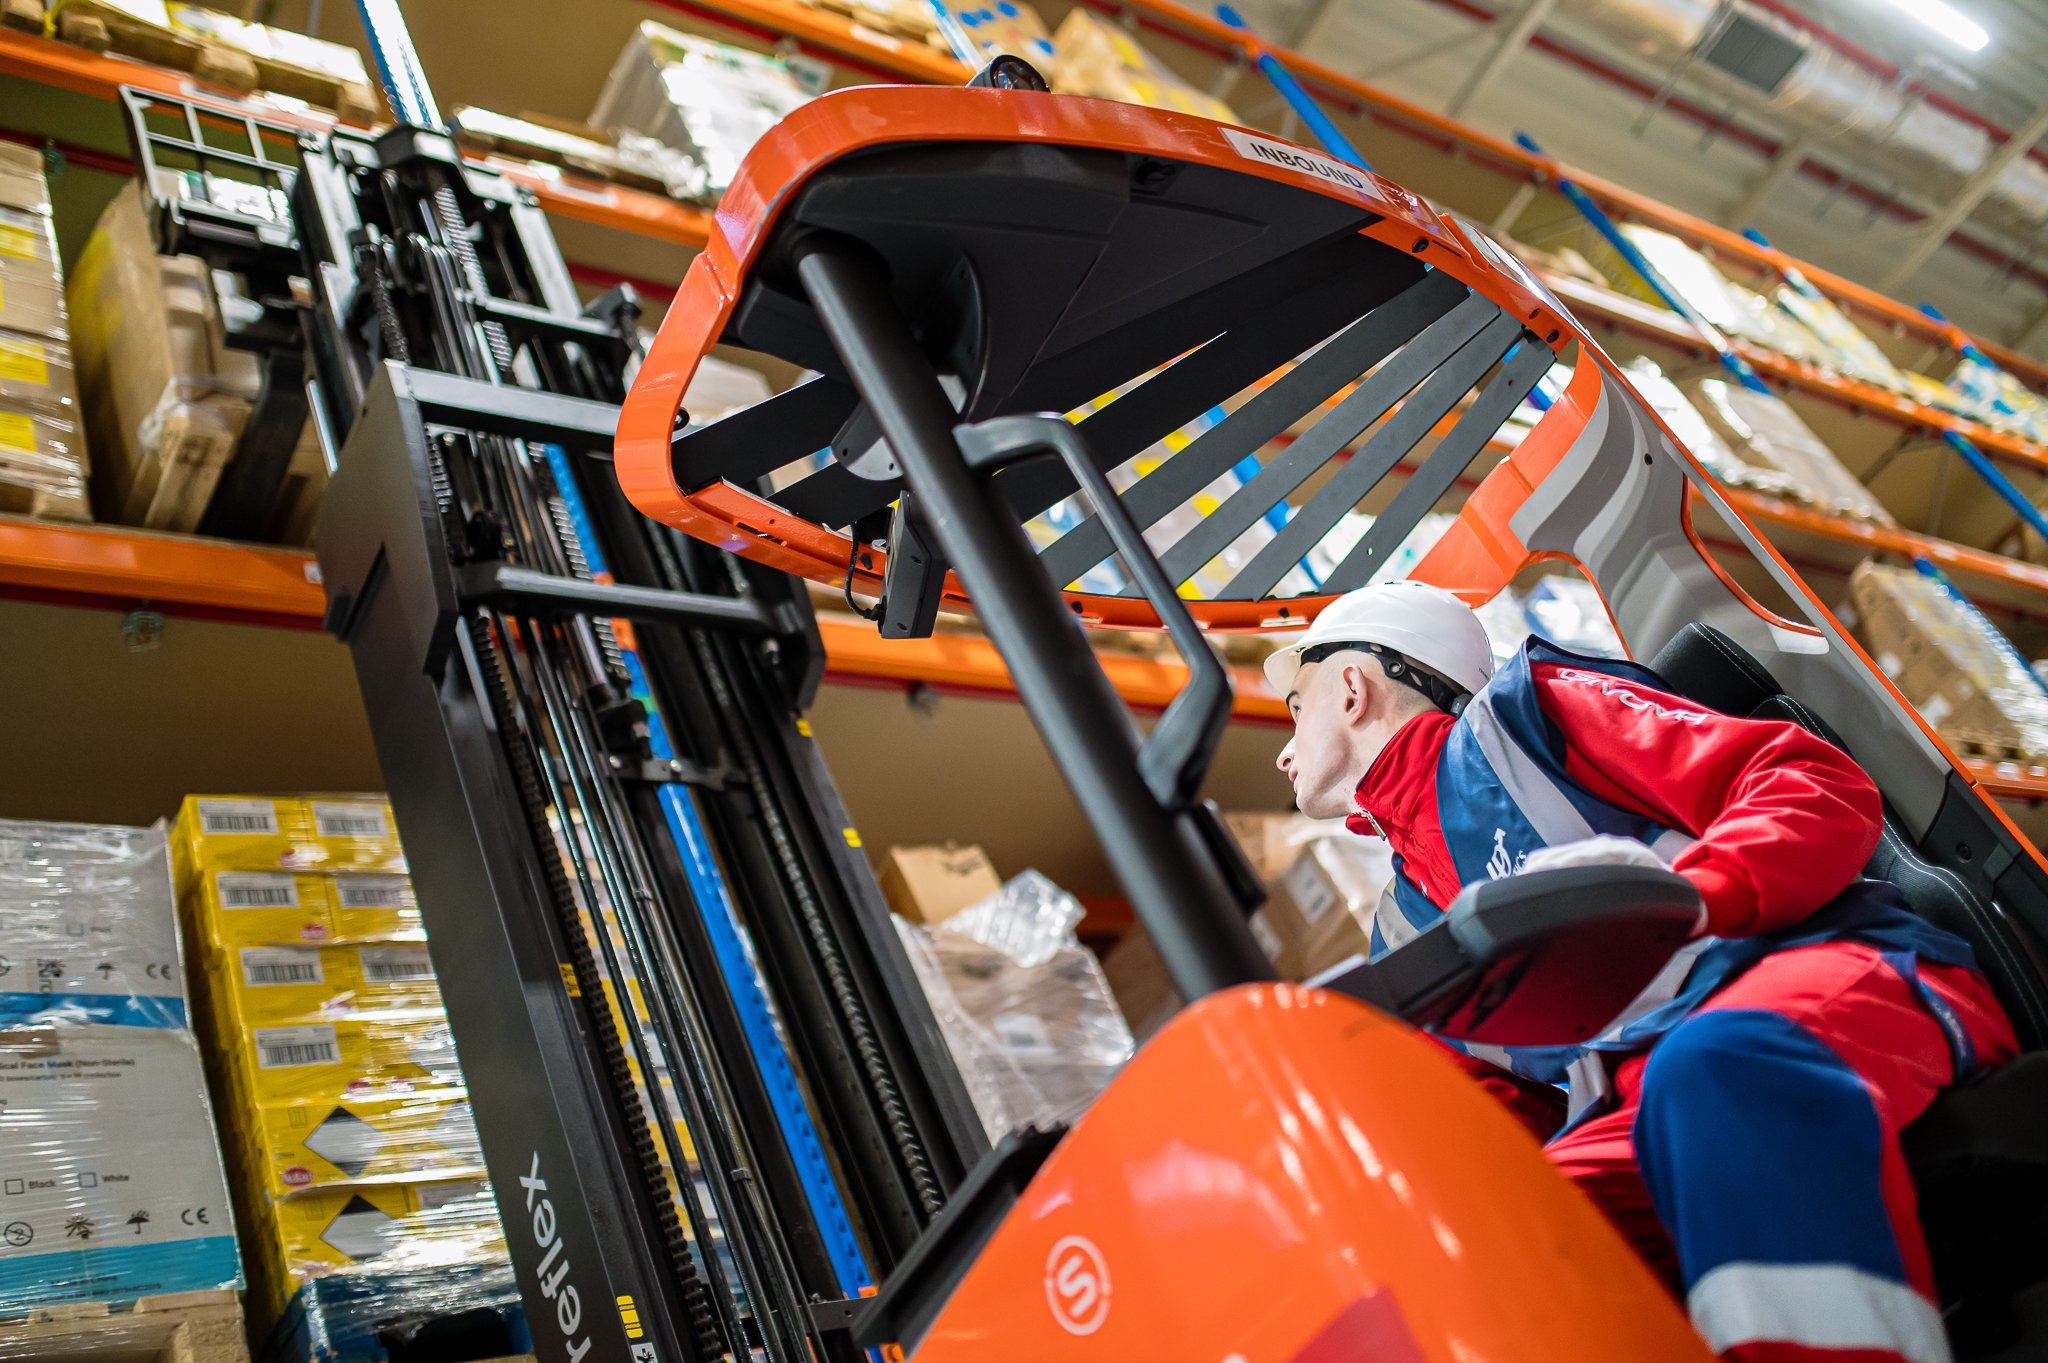 ID Logistics employee working with a forklift truck.